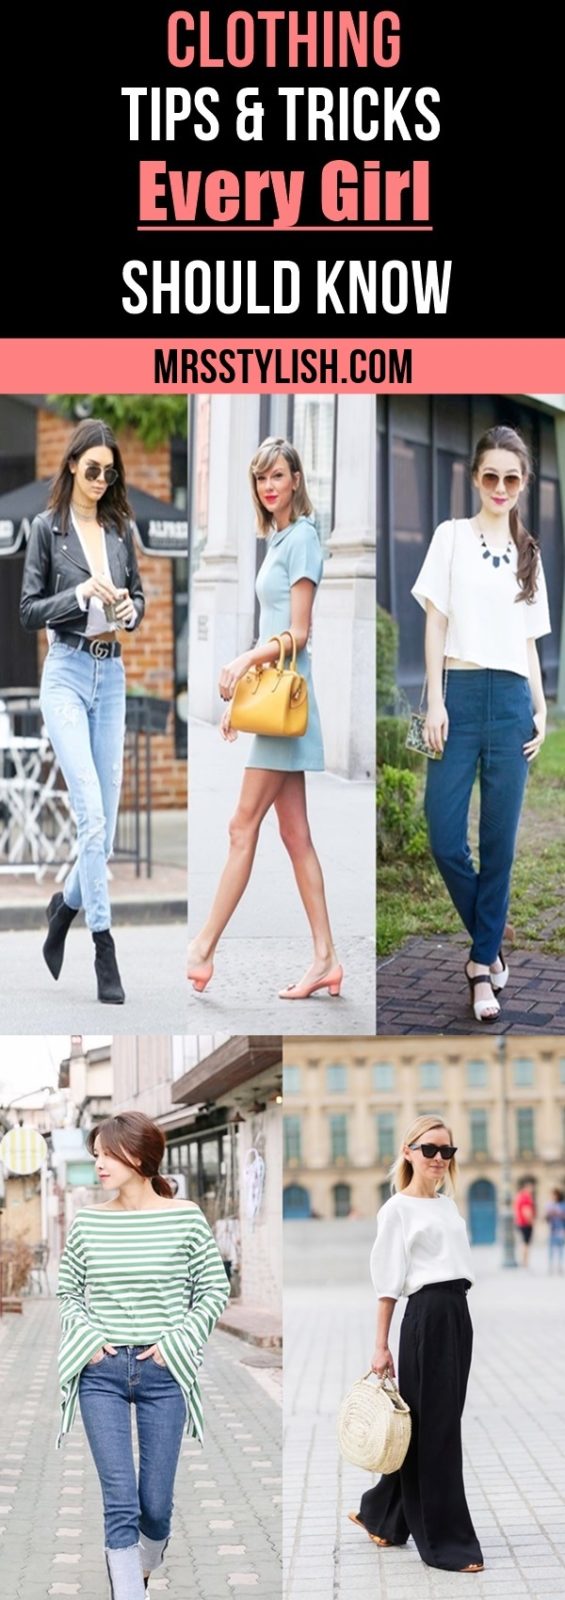 15 Clothing Tips & Tricks Every Girl Should Know